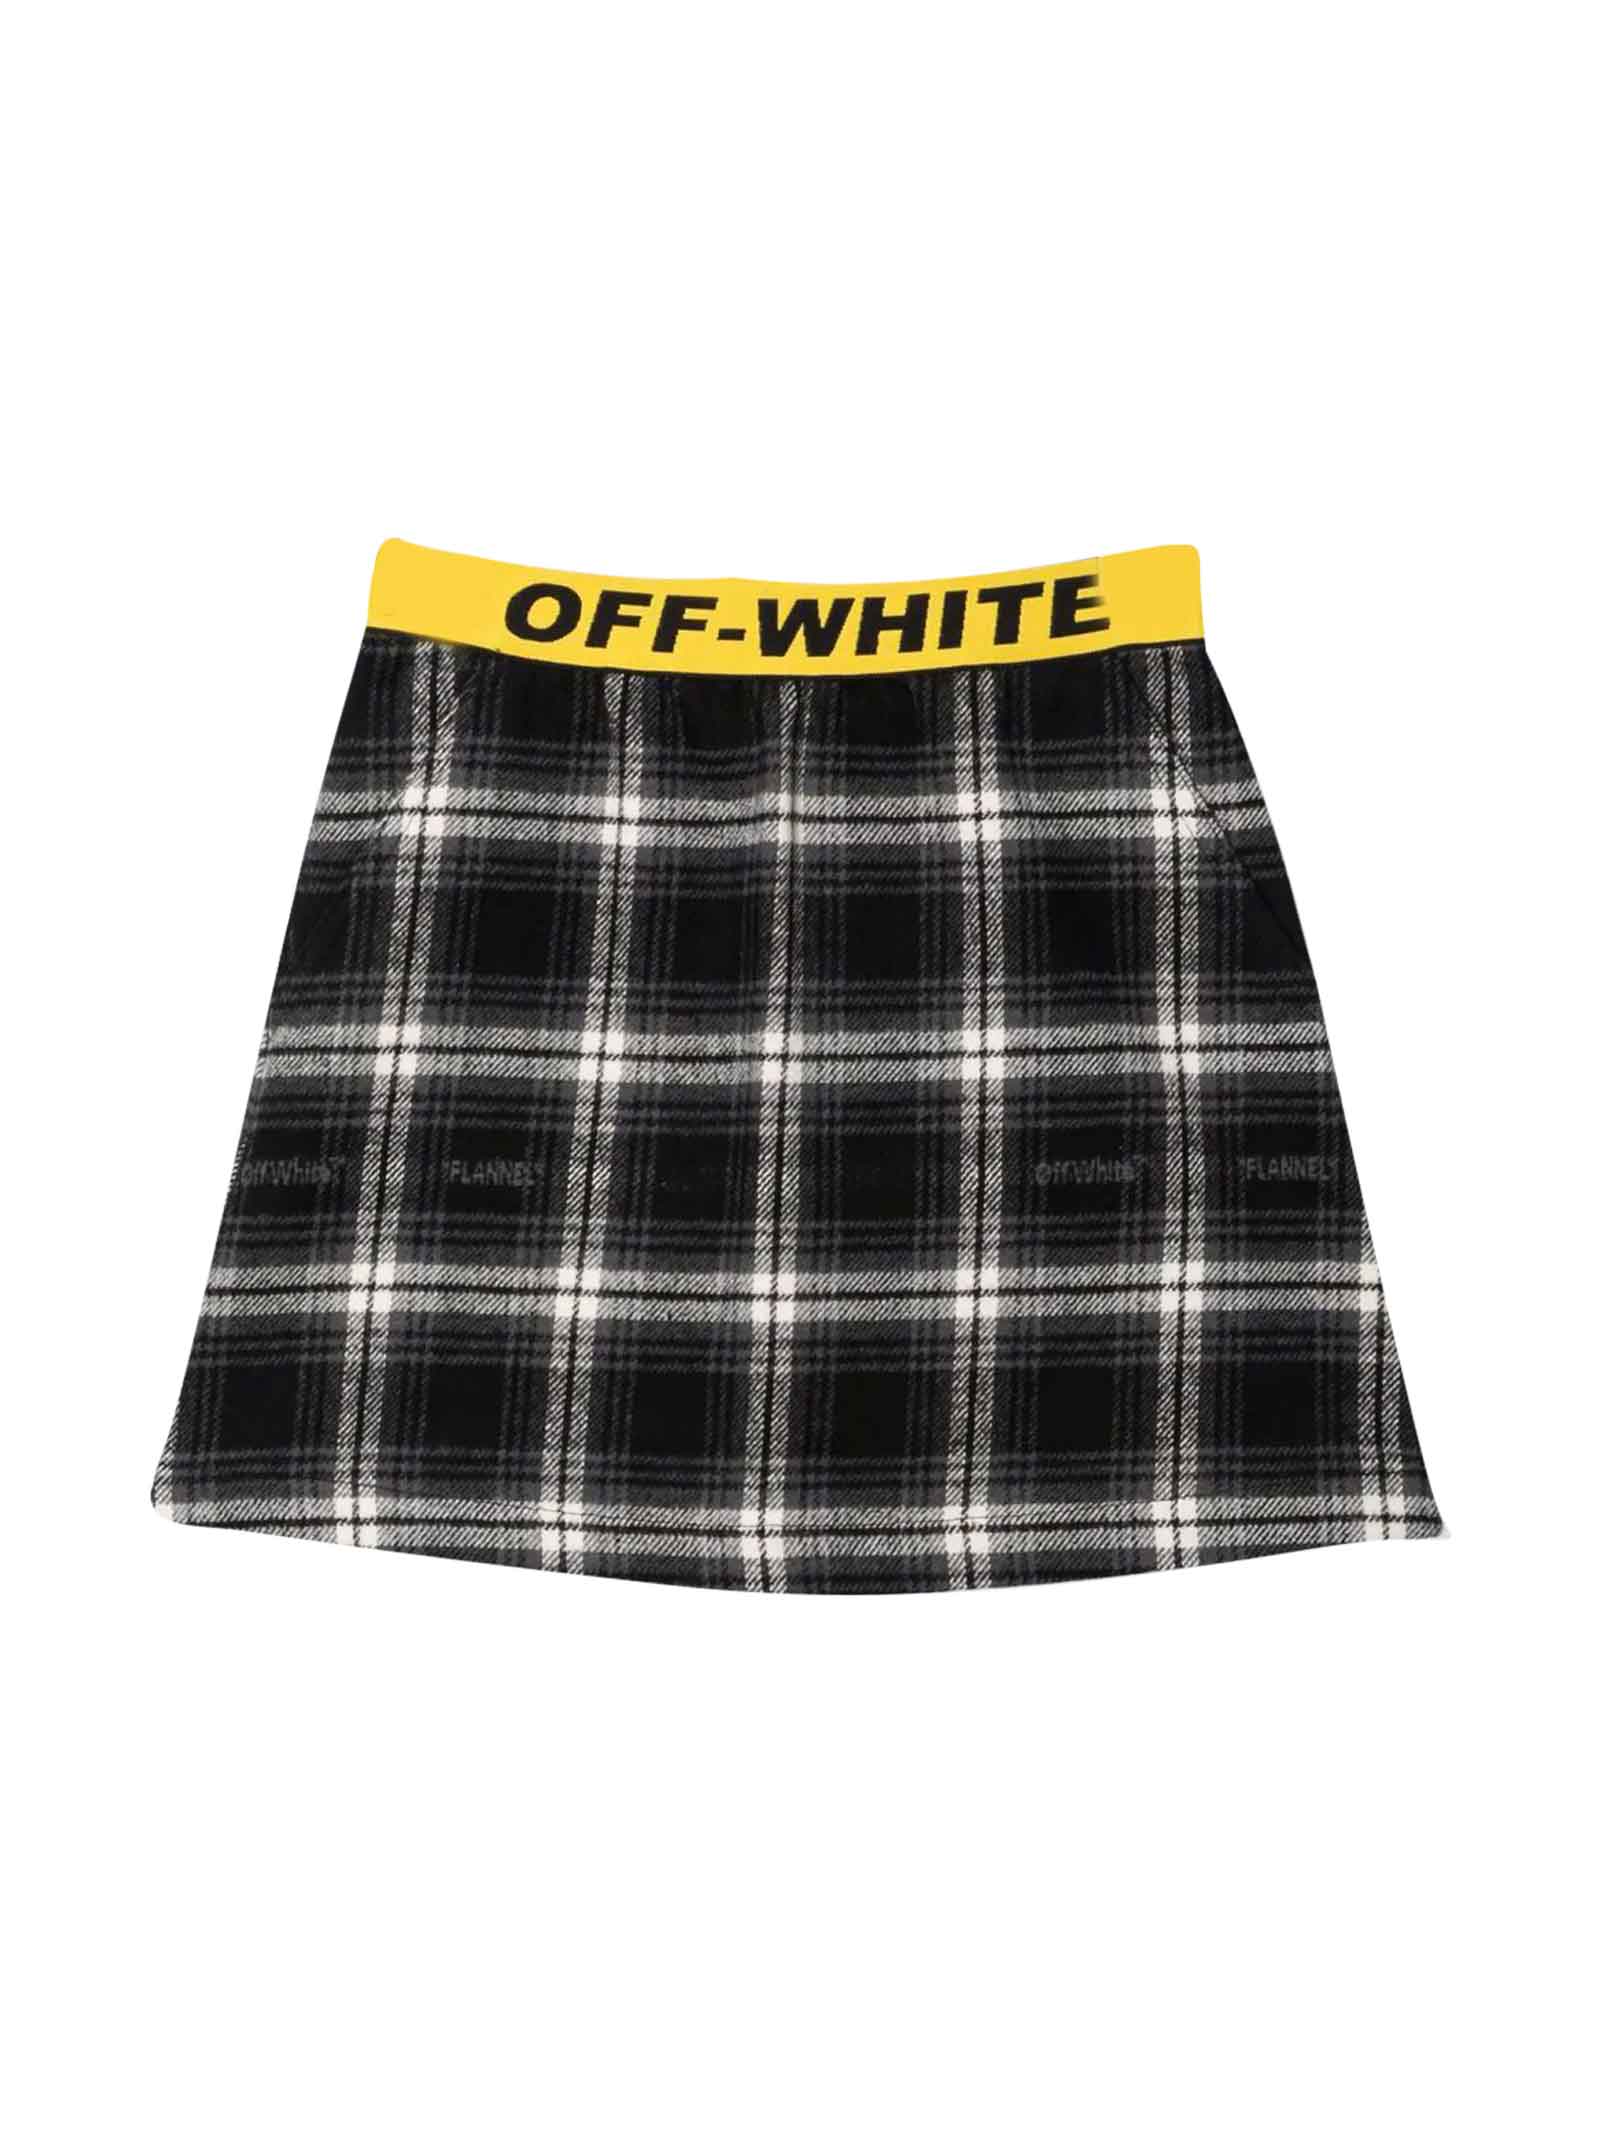 Off-White Black Skirt With Yellow Band